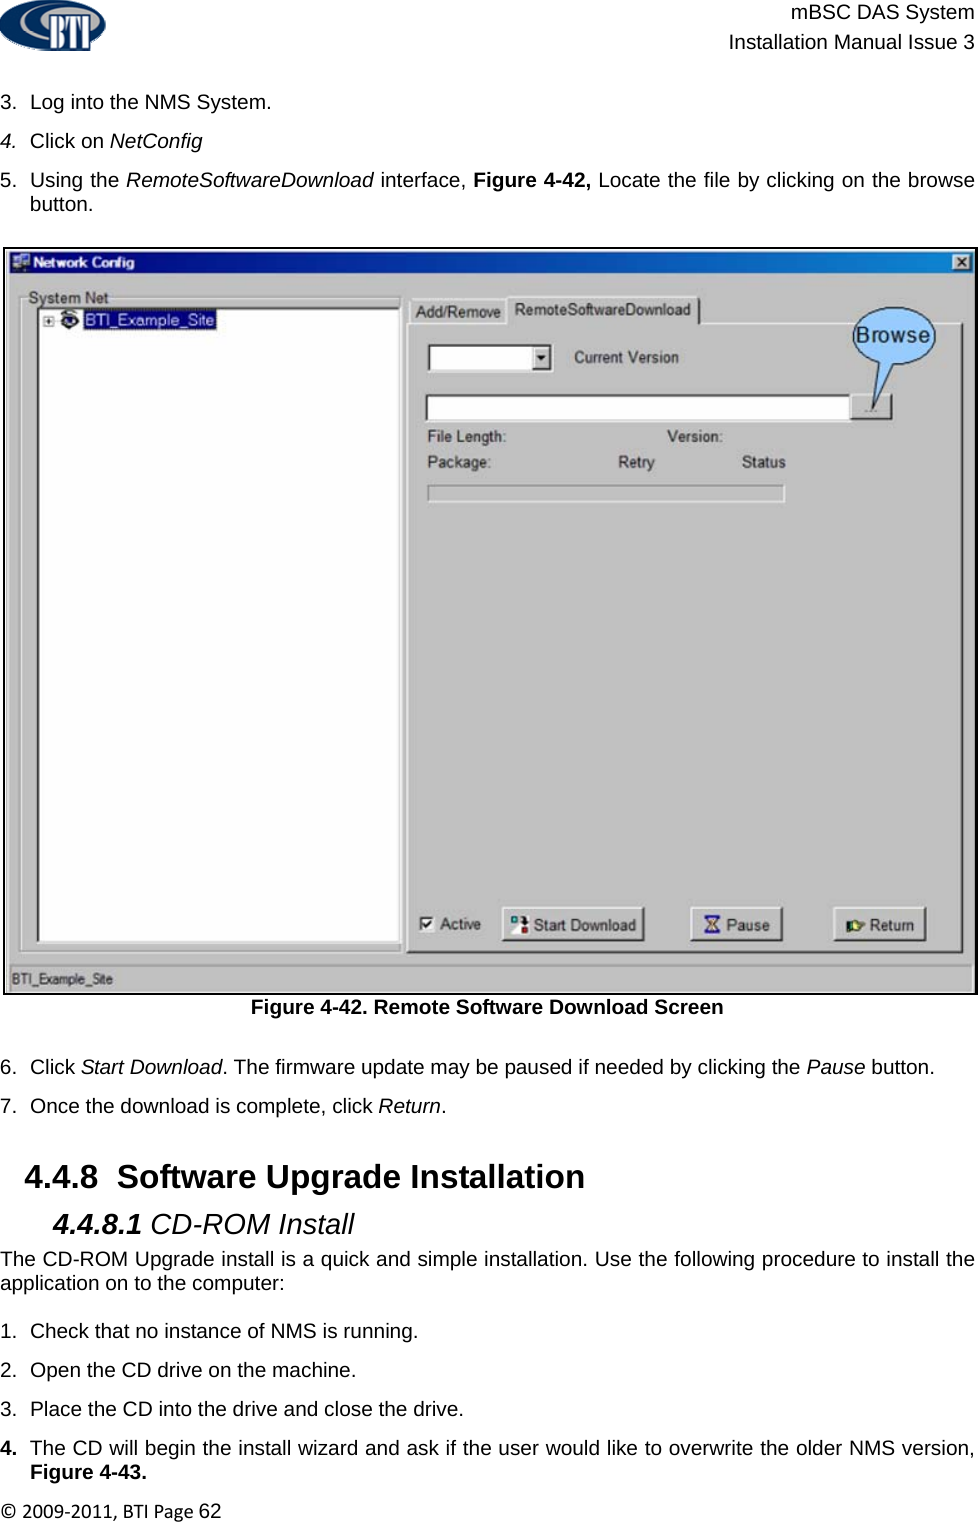                          mBSC DAS System  Installation Manual Issue 3  ©2009‐2011,BTIPage62  3.  Log into the NMS System. 4.  Click on NetConfig 5. Using the RemoteSoftwareDownload interface, Figure 4-42, Locate the file by clicking on the browse button. Figure 4-42. Remote Software Download Screen  6. Click Start Download. The firmware update may be paused if needed by clicking the Pause button. 7.  Once the download is complete, click Return.   4.4.8  Software Upgrade Installation  4.4.8.1 CD-ROM Install The CD-ROM Upgrade install is a quick and simple installation. Use the following procedure to install the application on to the computer:  1.  Check that no instance of NMS is running. 2.  Open the CD drive on the machine. 3.  Place the CD into the drive and close the drive. 4.  The CD will begin the install wizard and ask if the user would like to overwrite the older NMS version, Figure 4-43. 